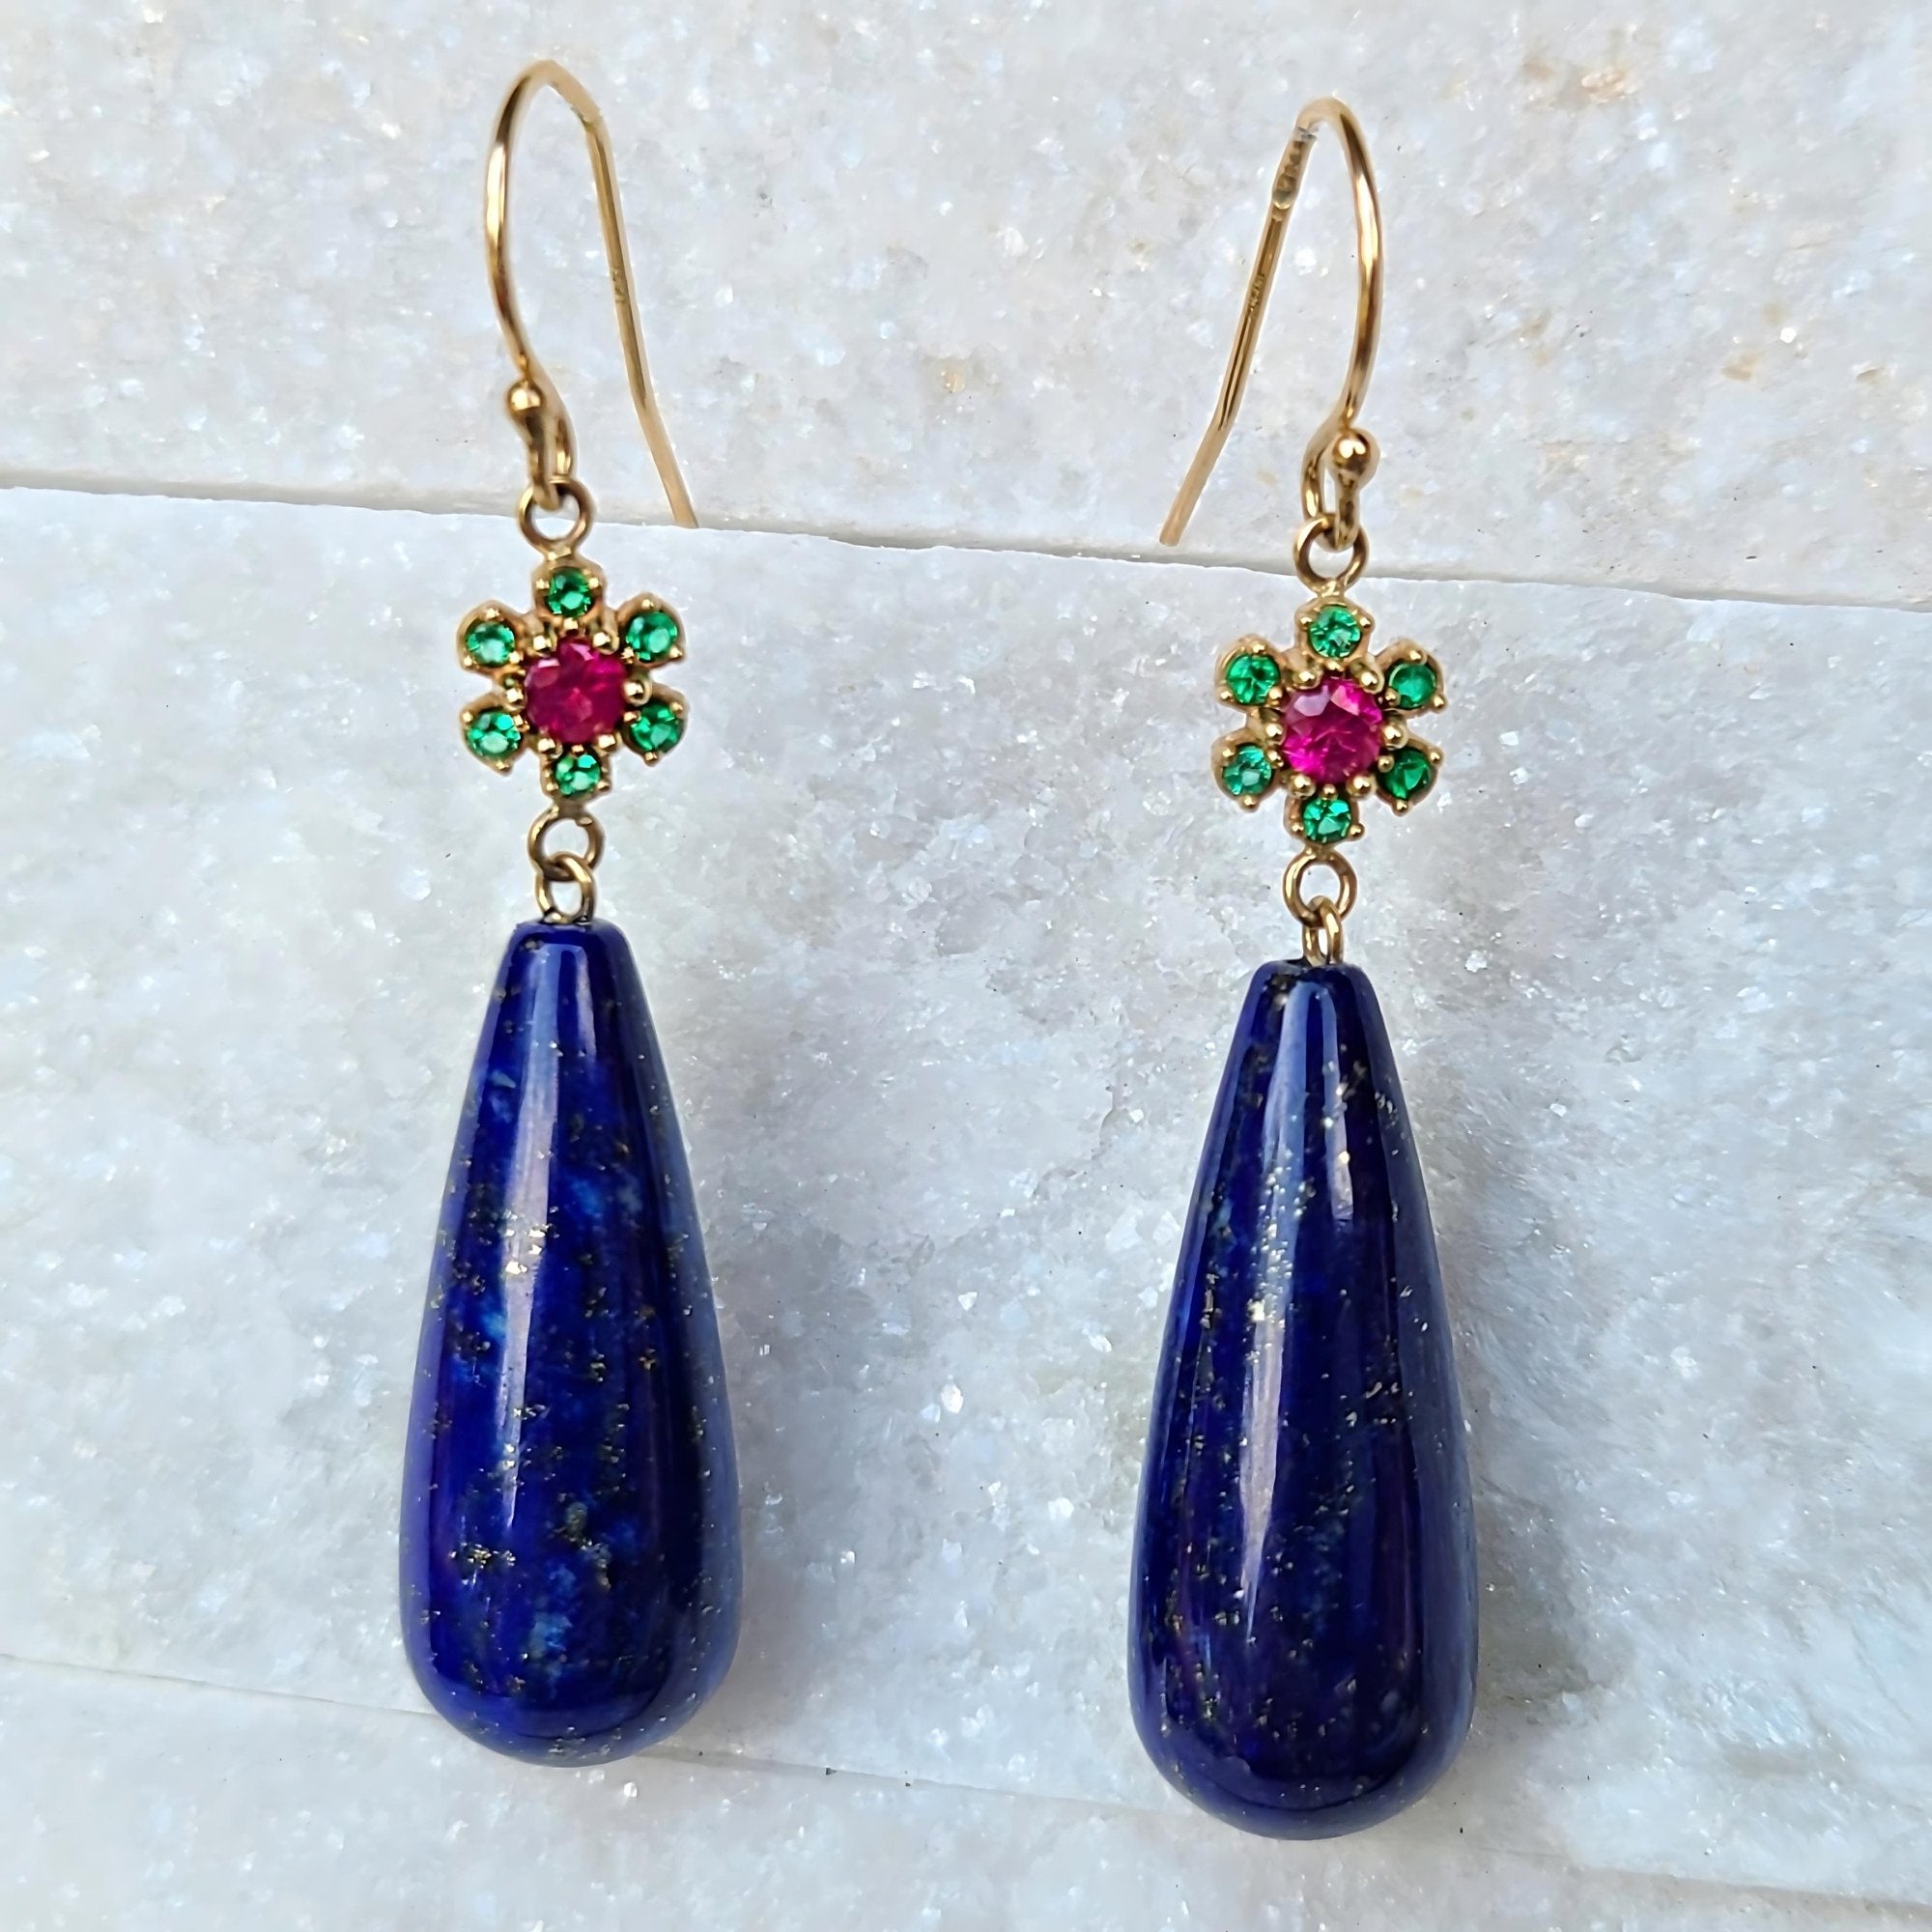 Image of 14K Yellow Gold Lapis Earrings with Emeralds & Rubies